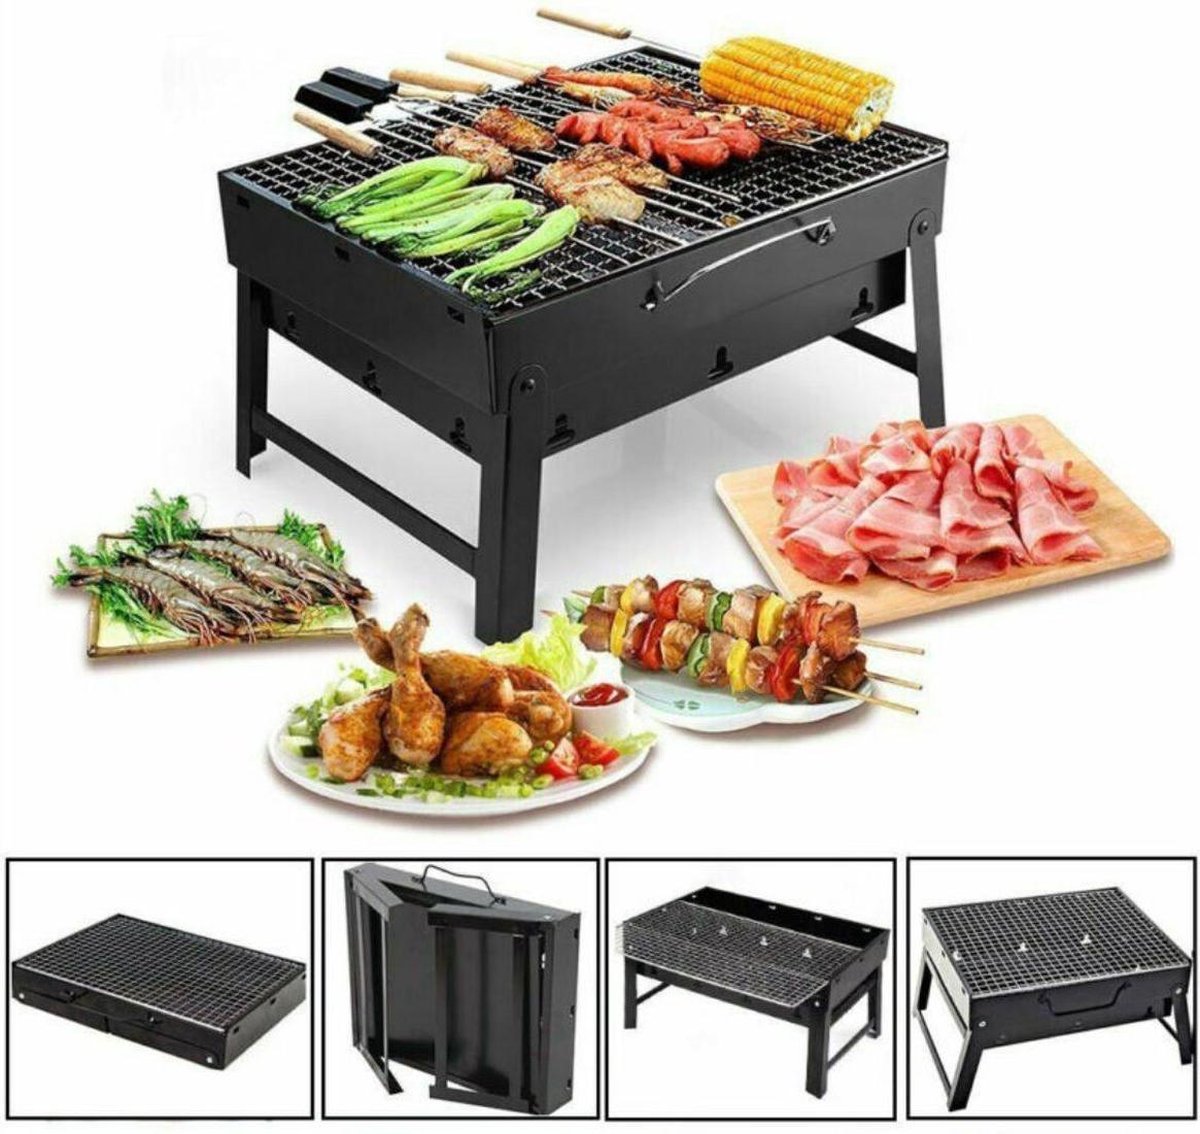 Opvouwbare BBQ - Draagbare opvouwbare grill met rooster - Portable Vouw Barbecue - Festival BBQ - Camping - Tafel - Zomer - Vaderdag - Park - Rechthoekig - 35 x 27.50 x 20 cm - Zwart